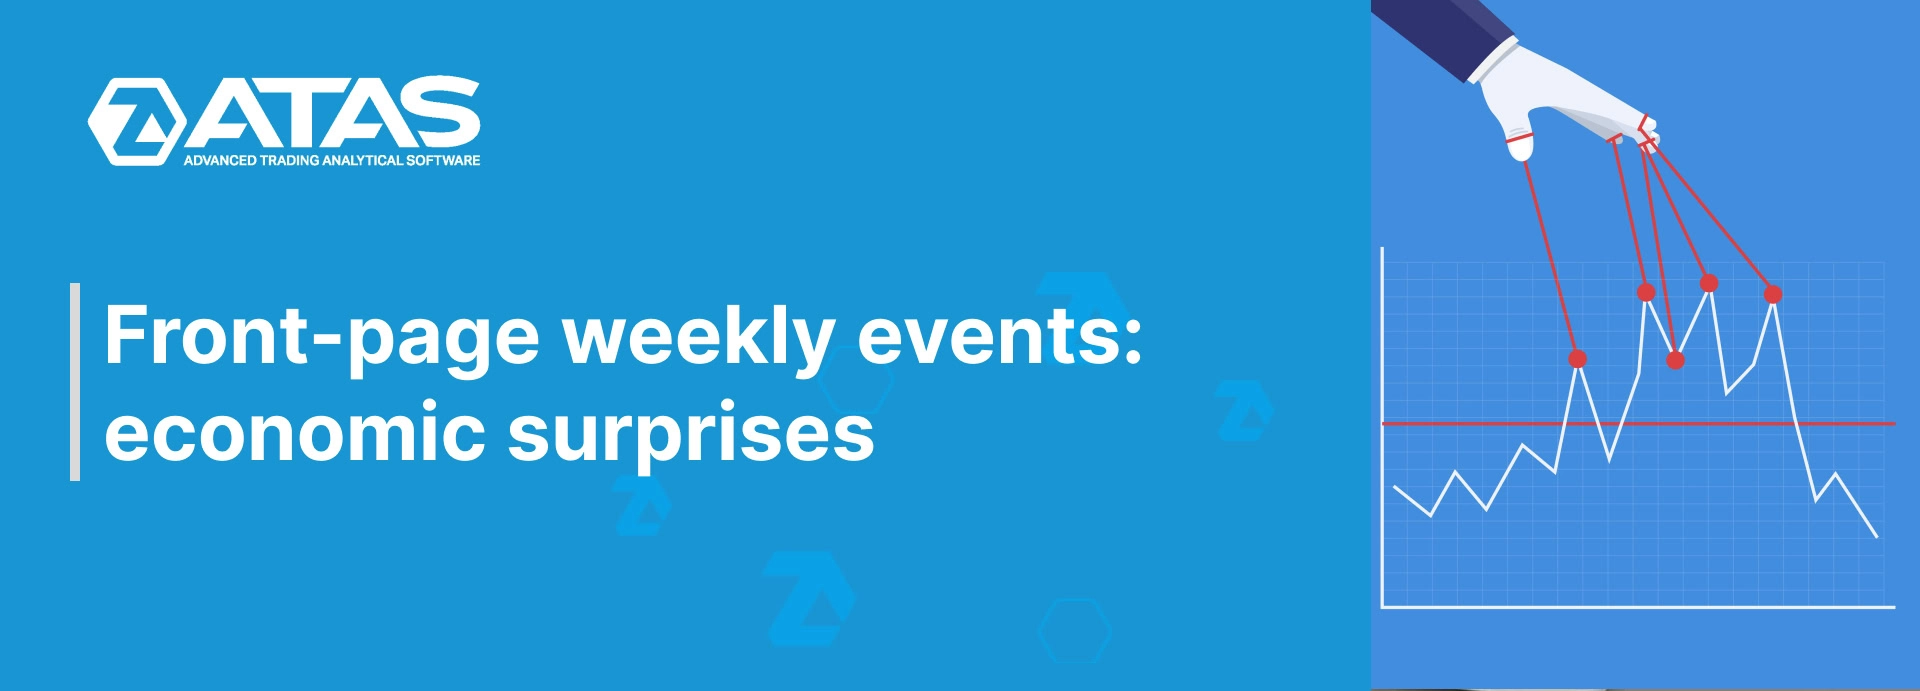 Front-page weekly events economic surprises